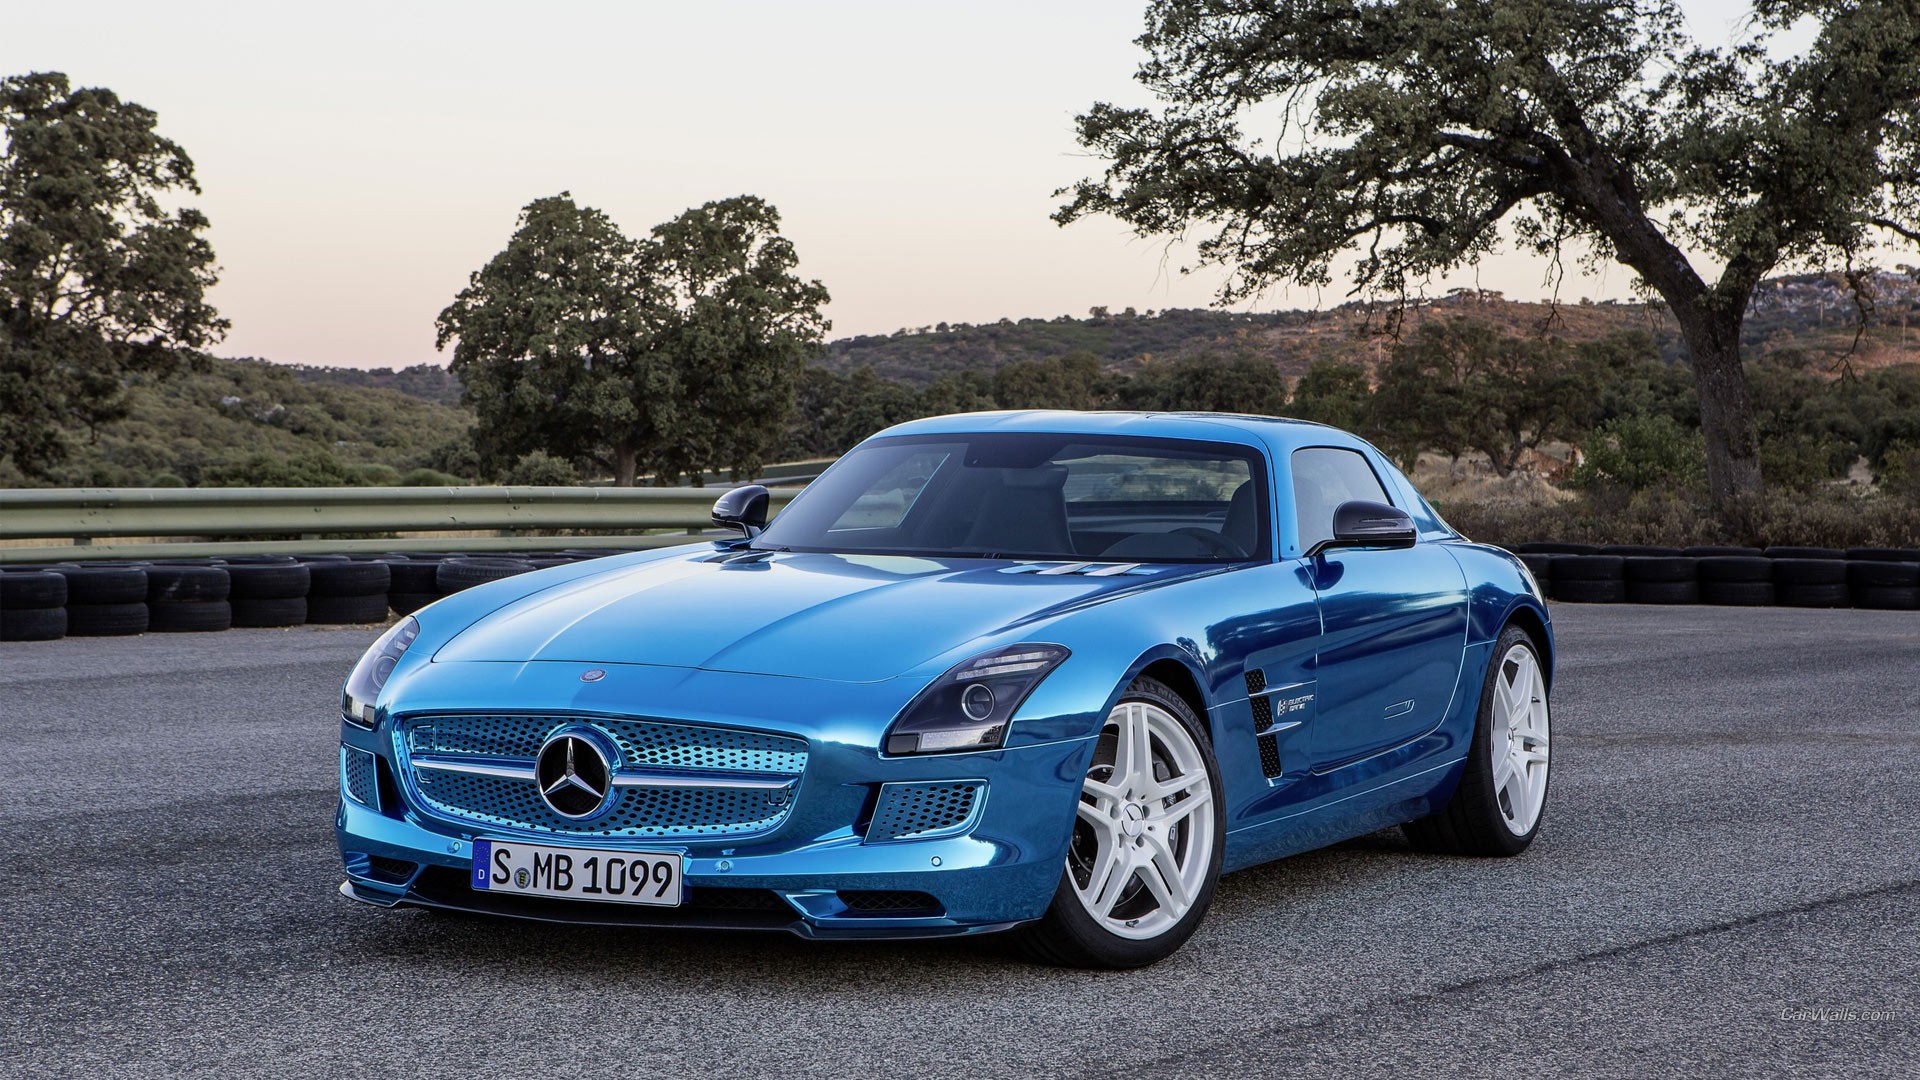 General 1920x1080 Mercedes-Benz SLS AMG car Mercedes-Benz numbers blue cars vehicle German cars Grand Tour frontal view